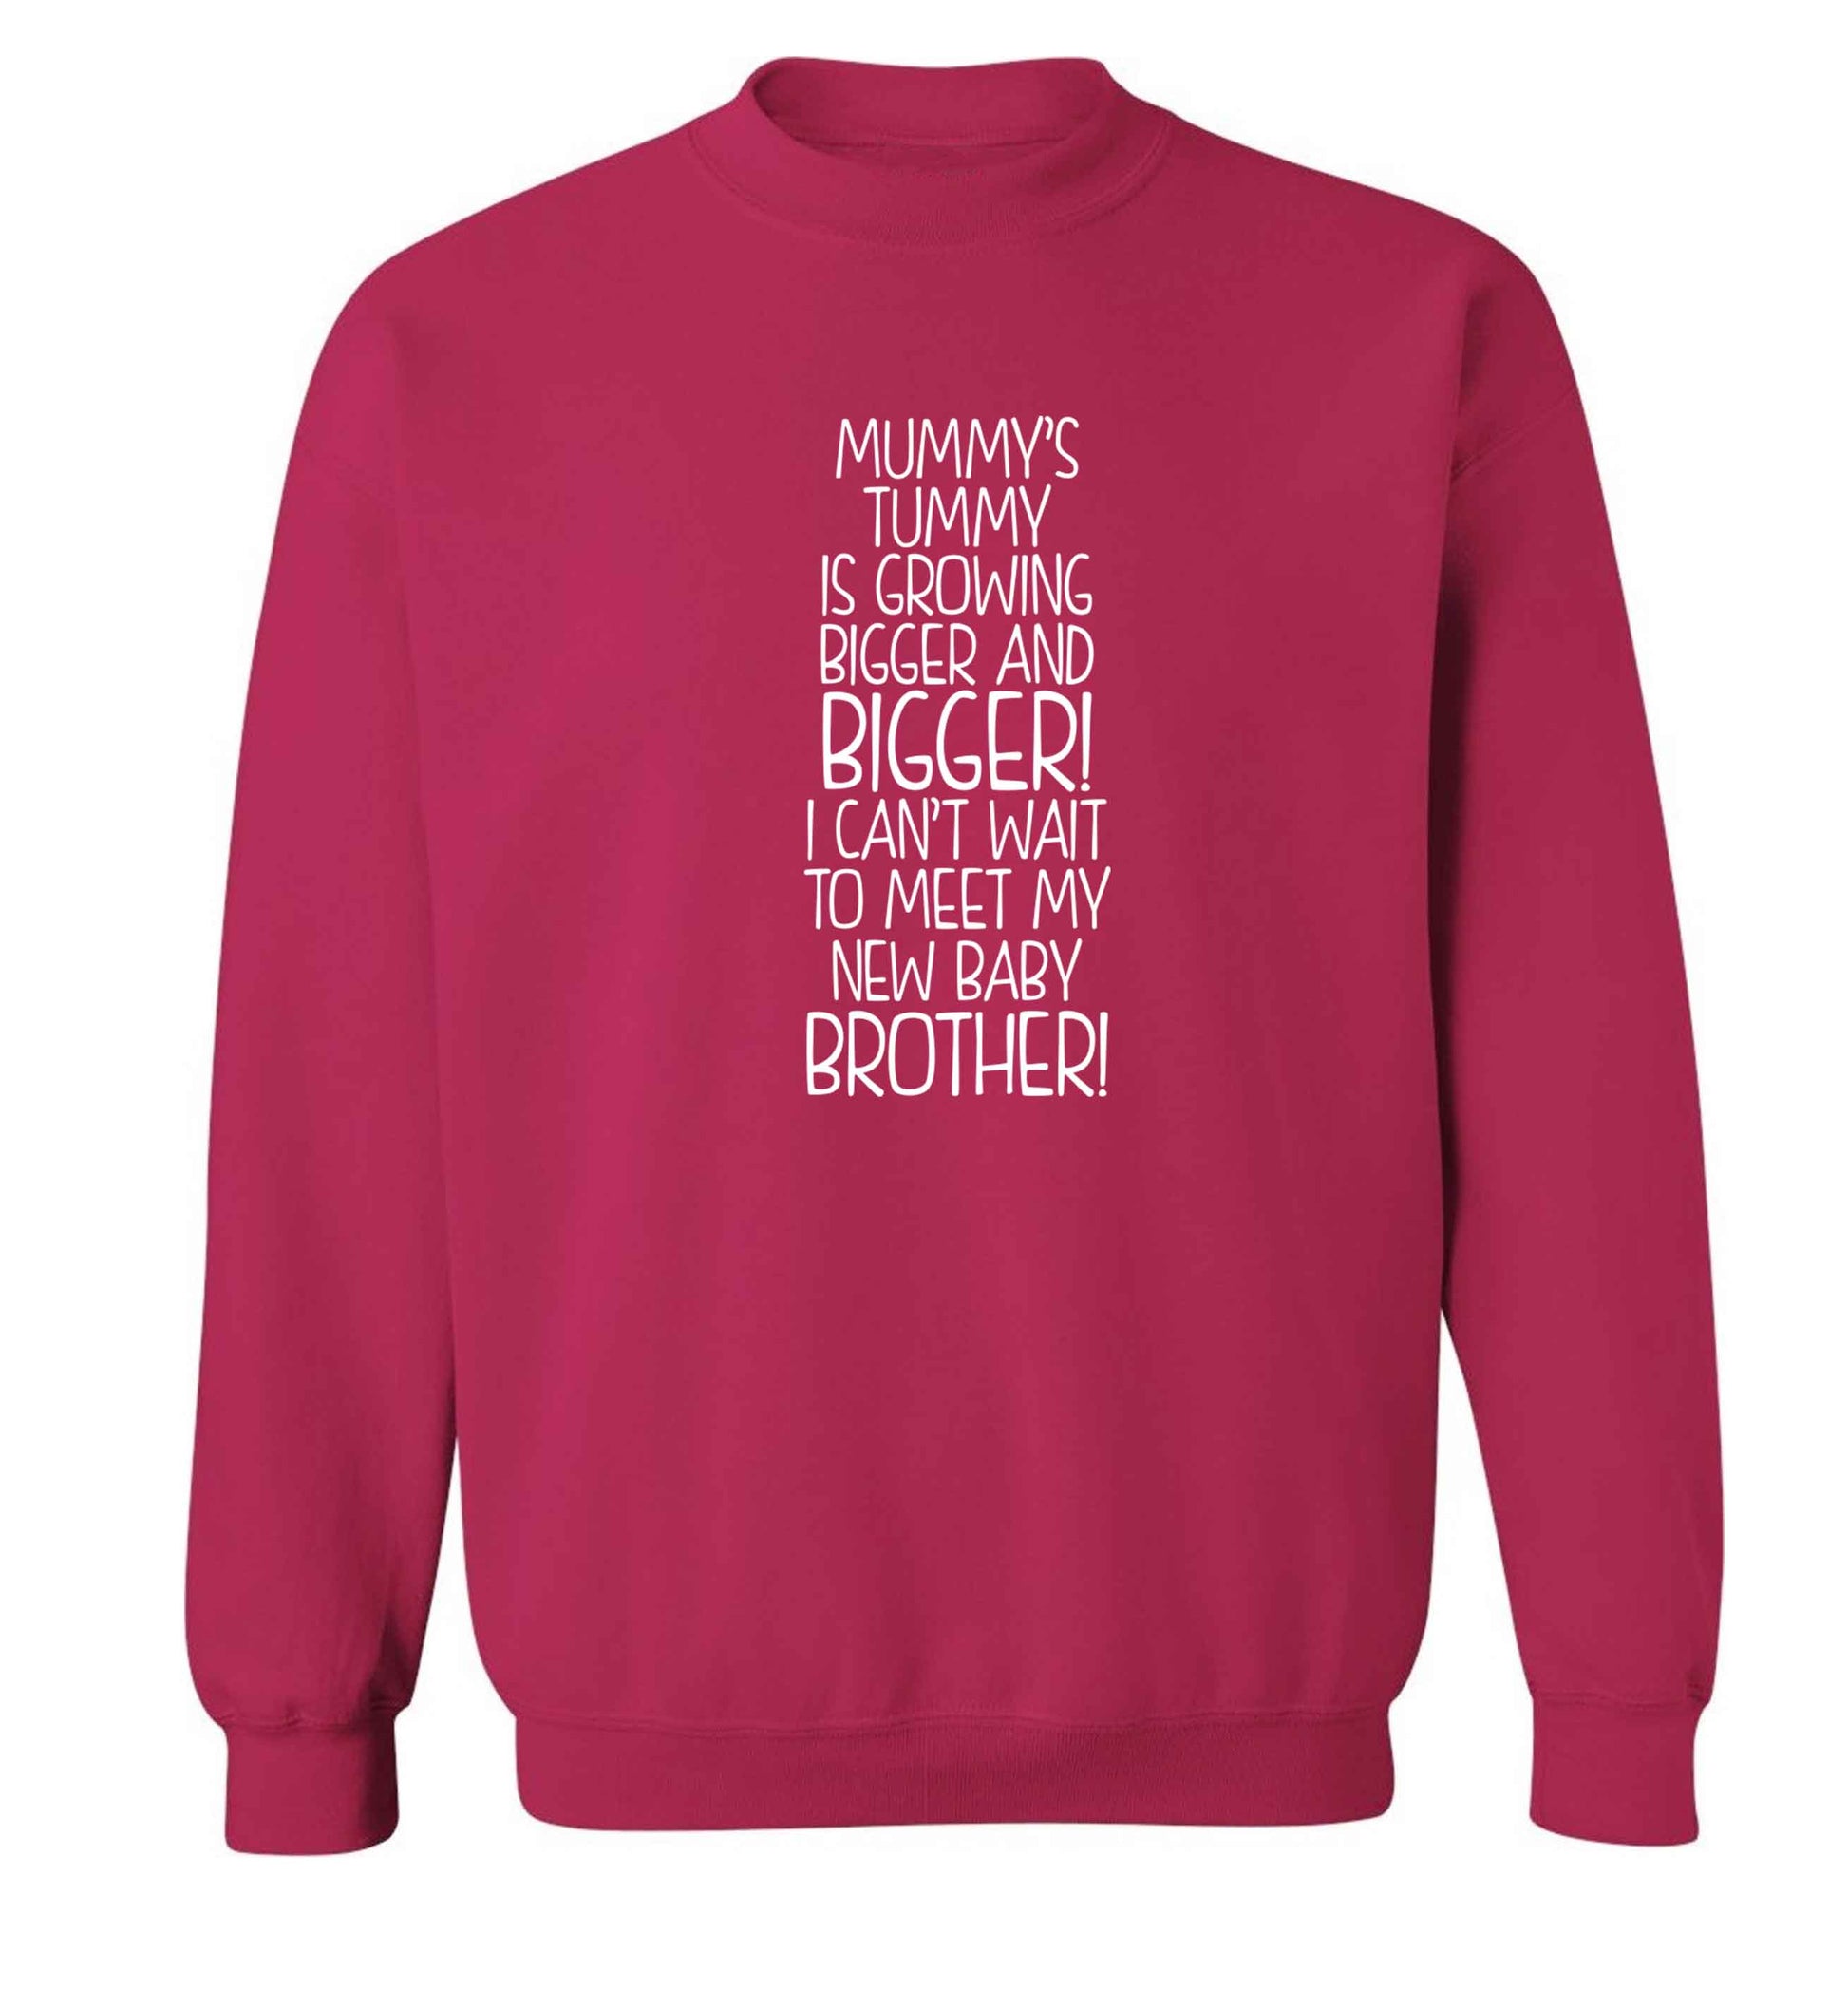 Mummy's tummy is growing bigger and bigger I can't wait to meet my new baby brother! Adult's unisex pink Sweater 2XL